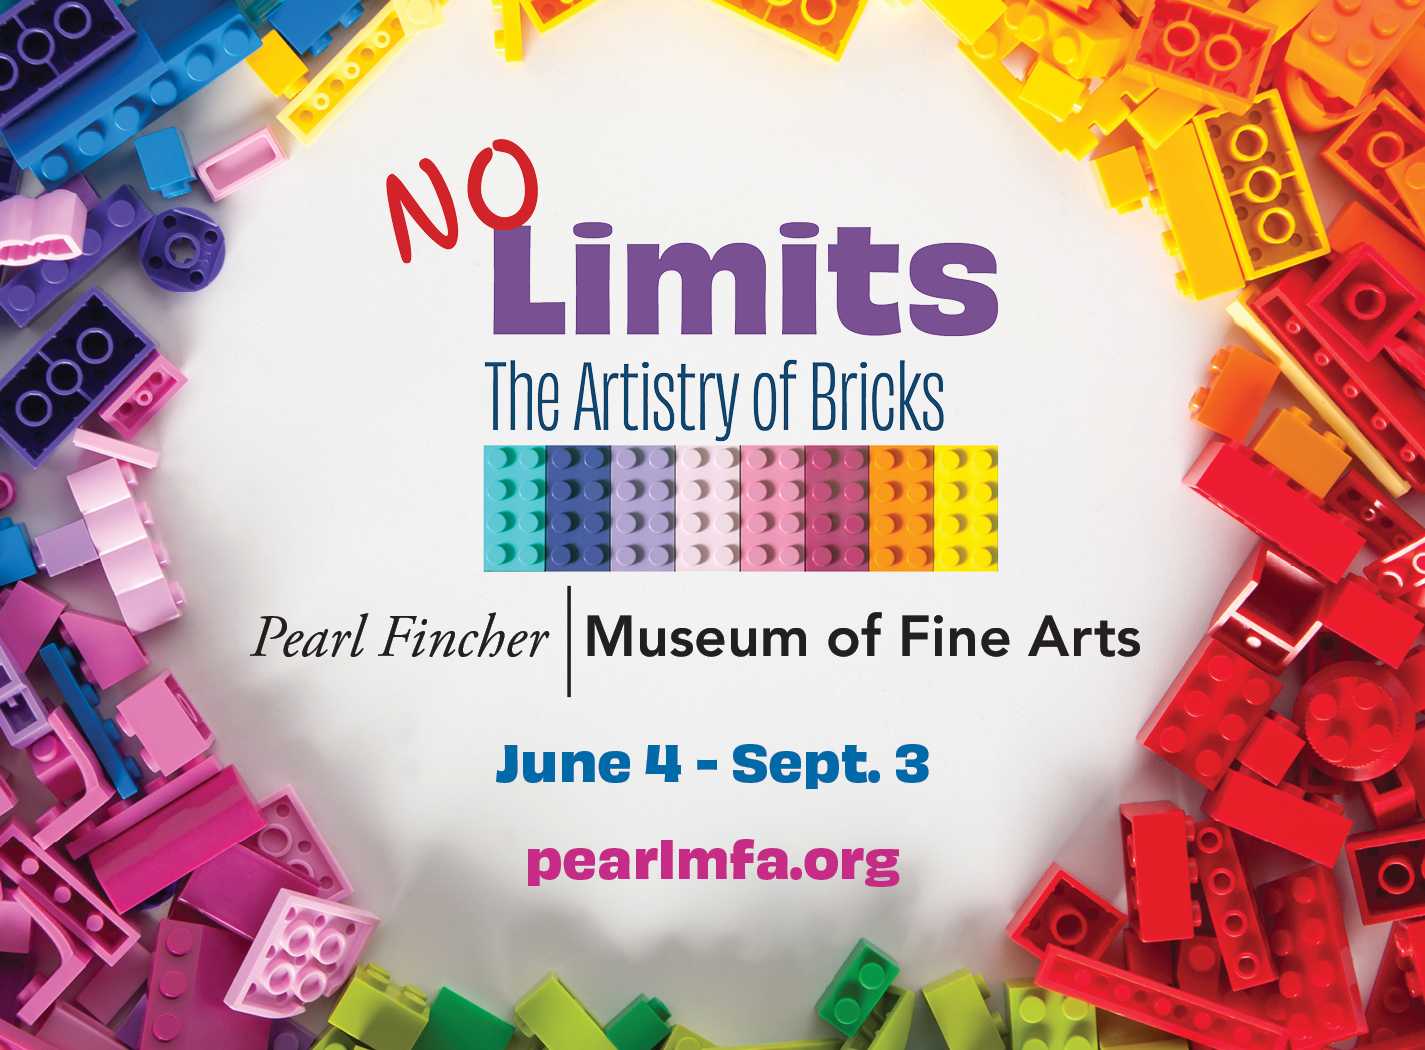 “No Limits: The Artistry of Bricks” at the Pearl Fincher Museum of Fine Arts